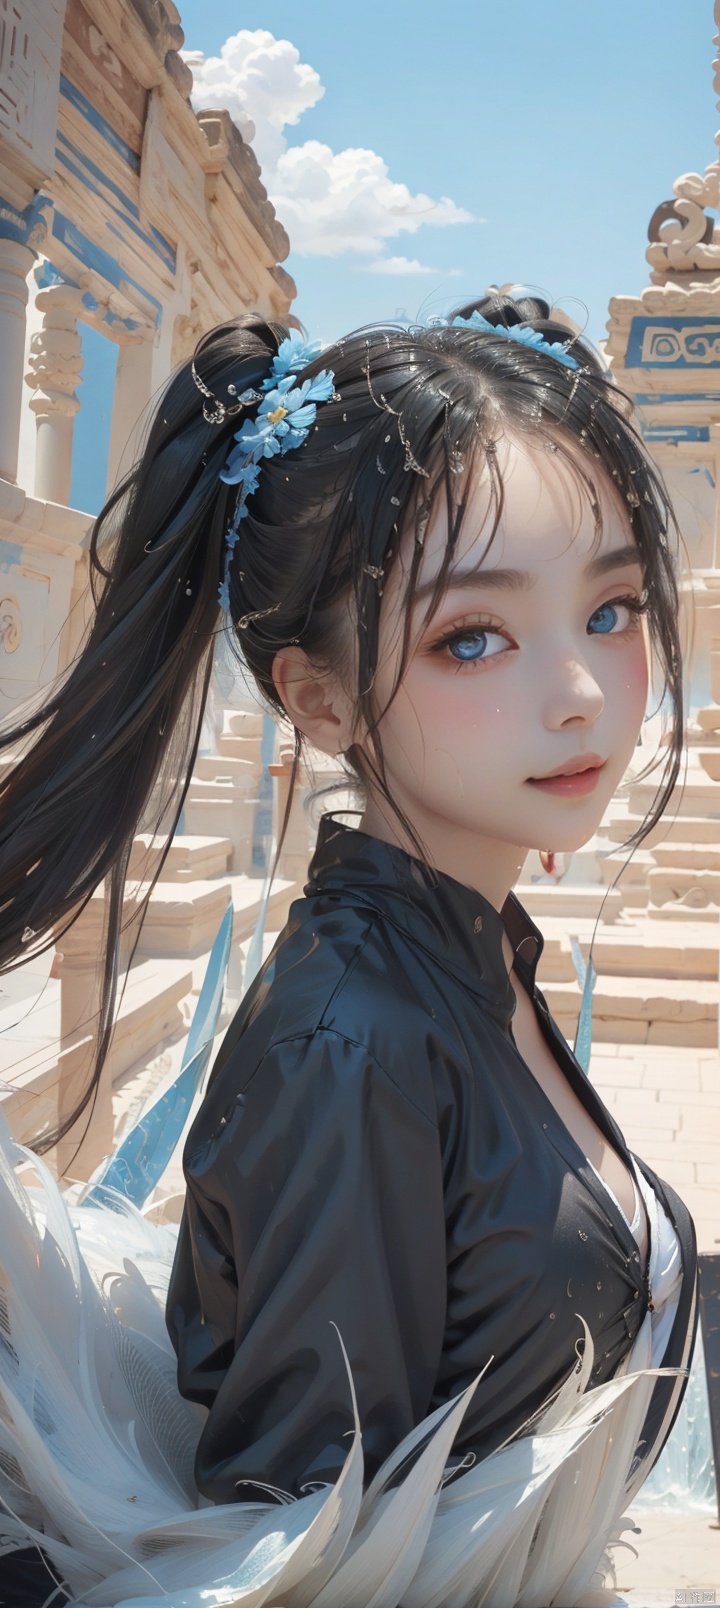 Wet the whole body,***** lips visible,twintails,long hair,black hair,flat chest,on dunhuang,day,blue Sky,clouds,long legwears,Seductive smile,Narrow shoulders,extremely detailed eyes and face, beautiful detailed eyes,very big eyes,Somebody watching the girl,Black clothes